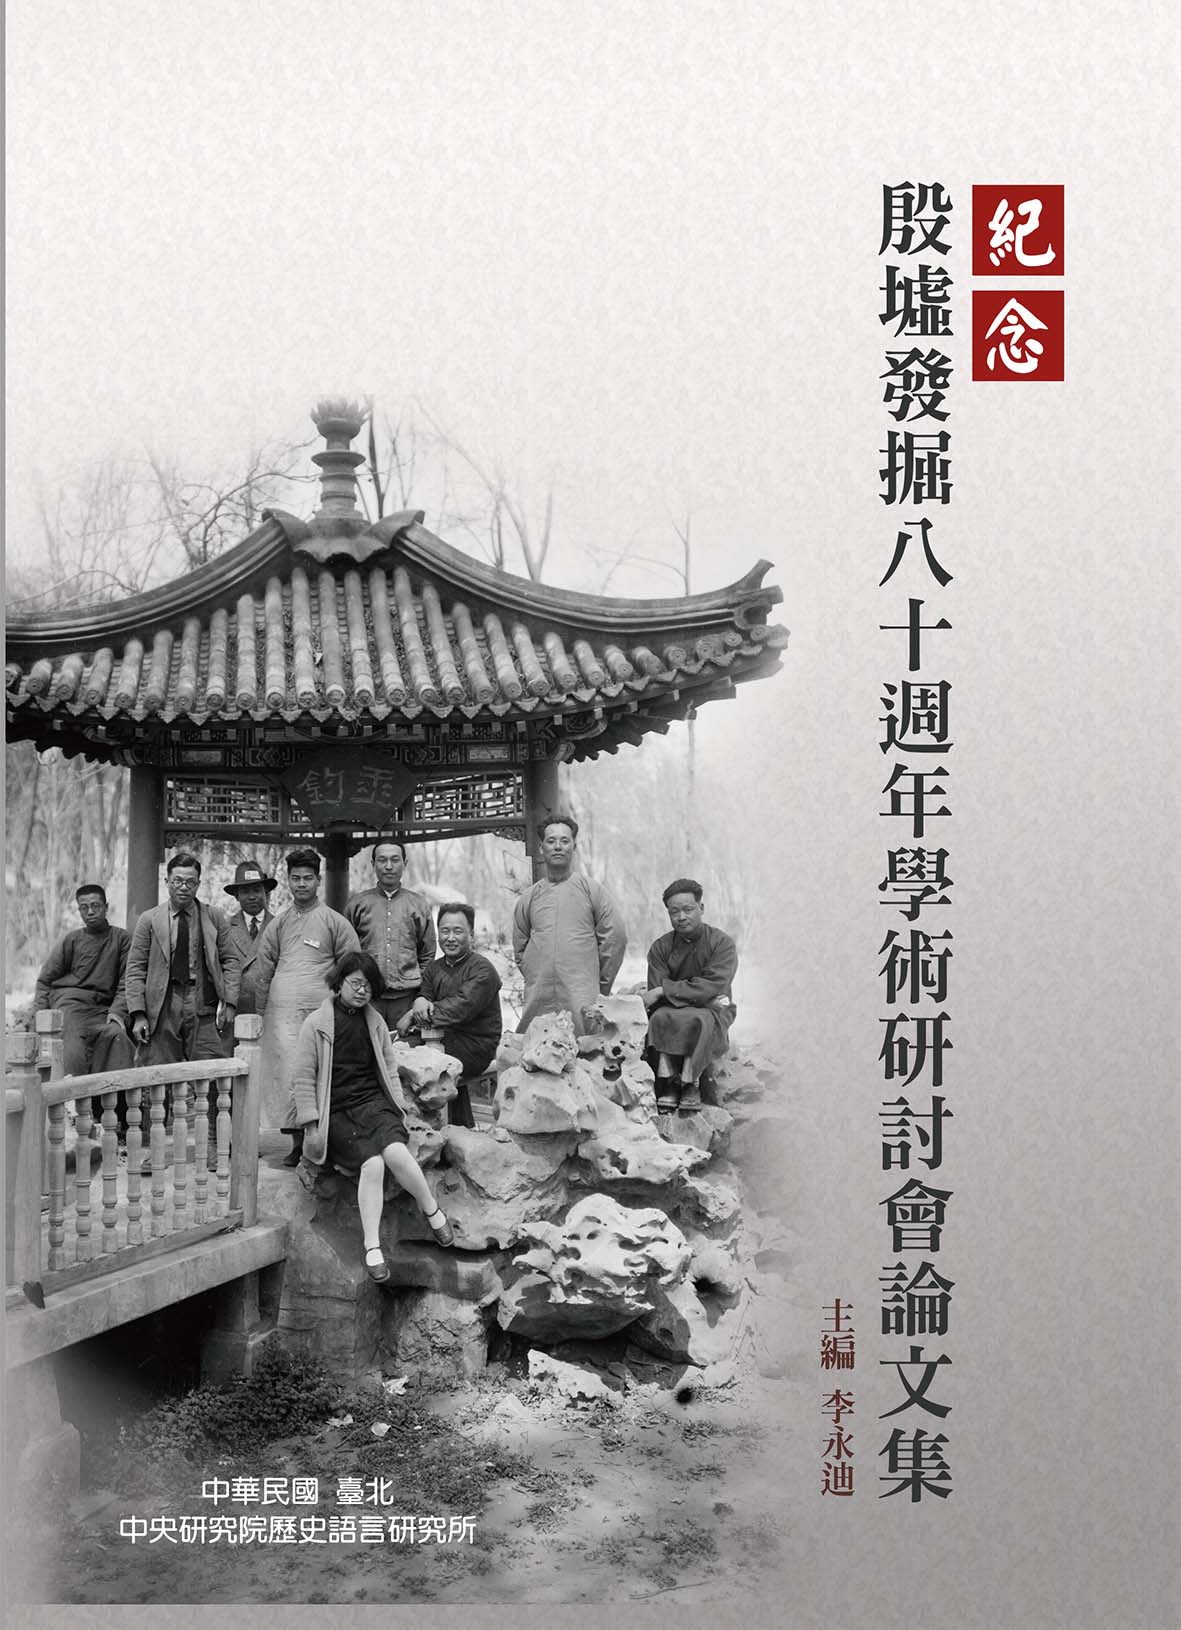 Proceedings of the Conference Commemorating the 80th Anniversary of the Anyang Excavations